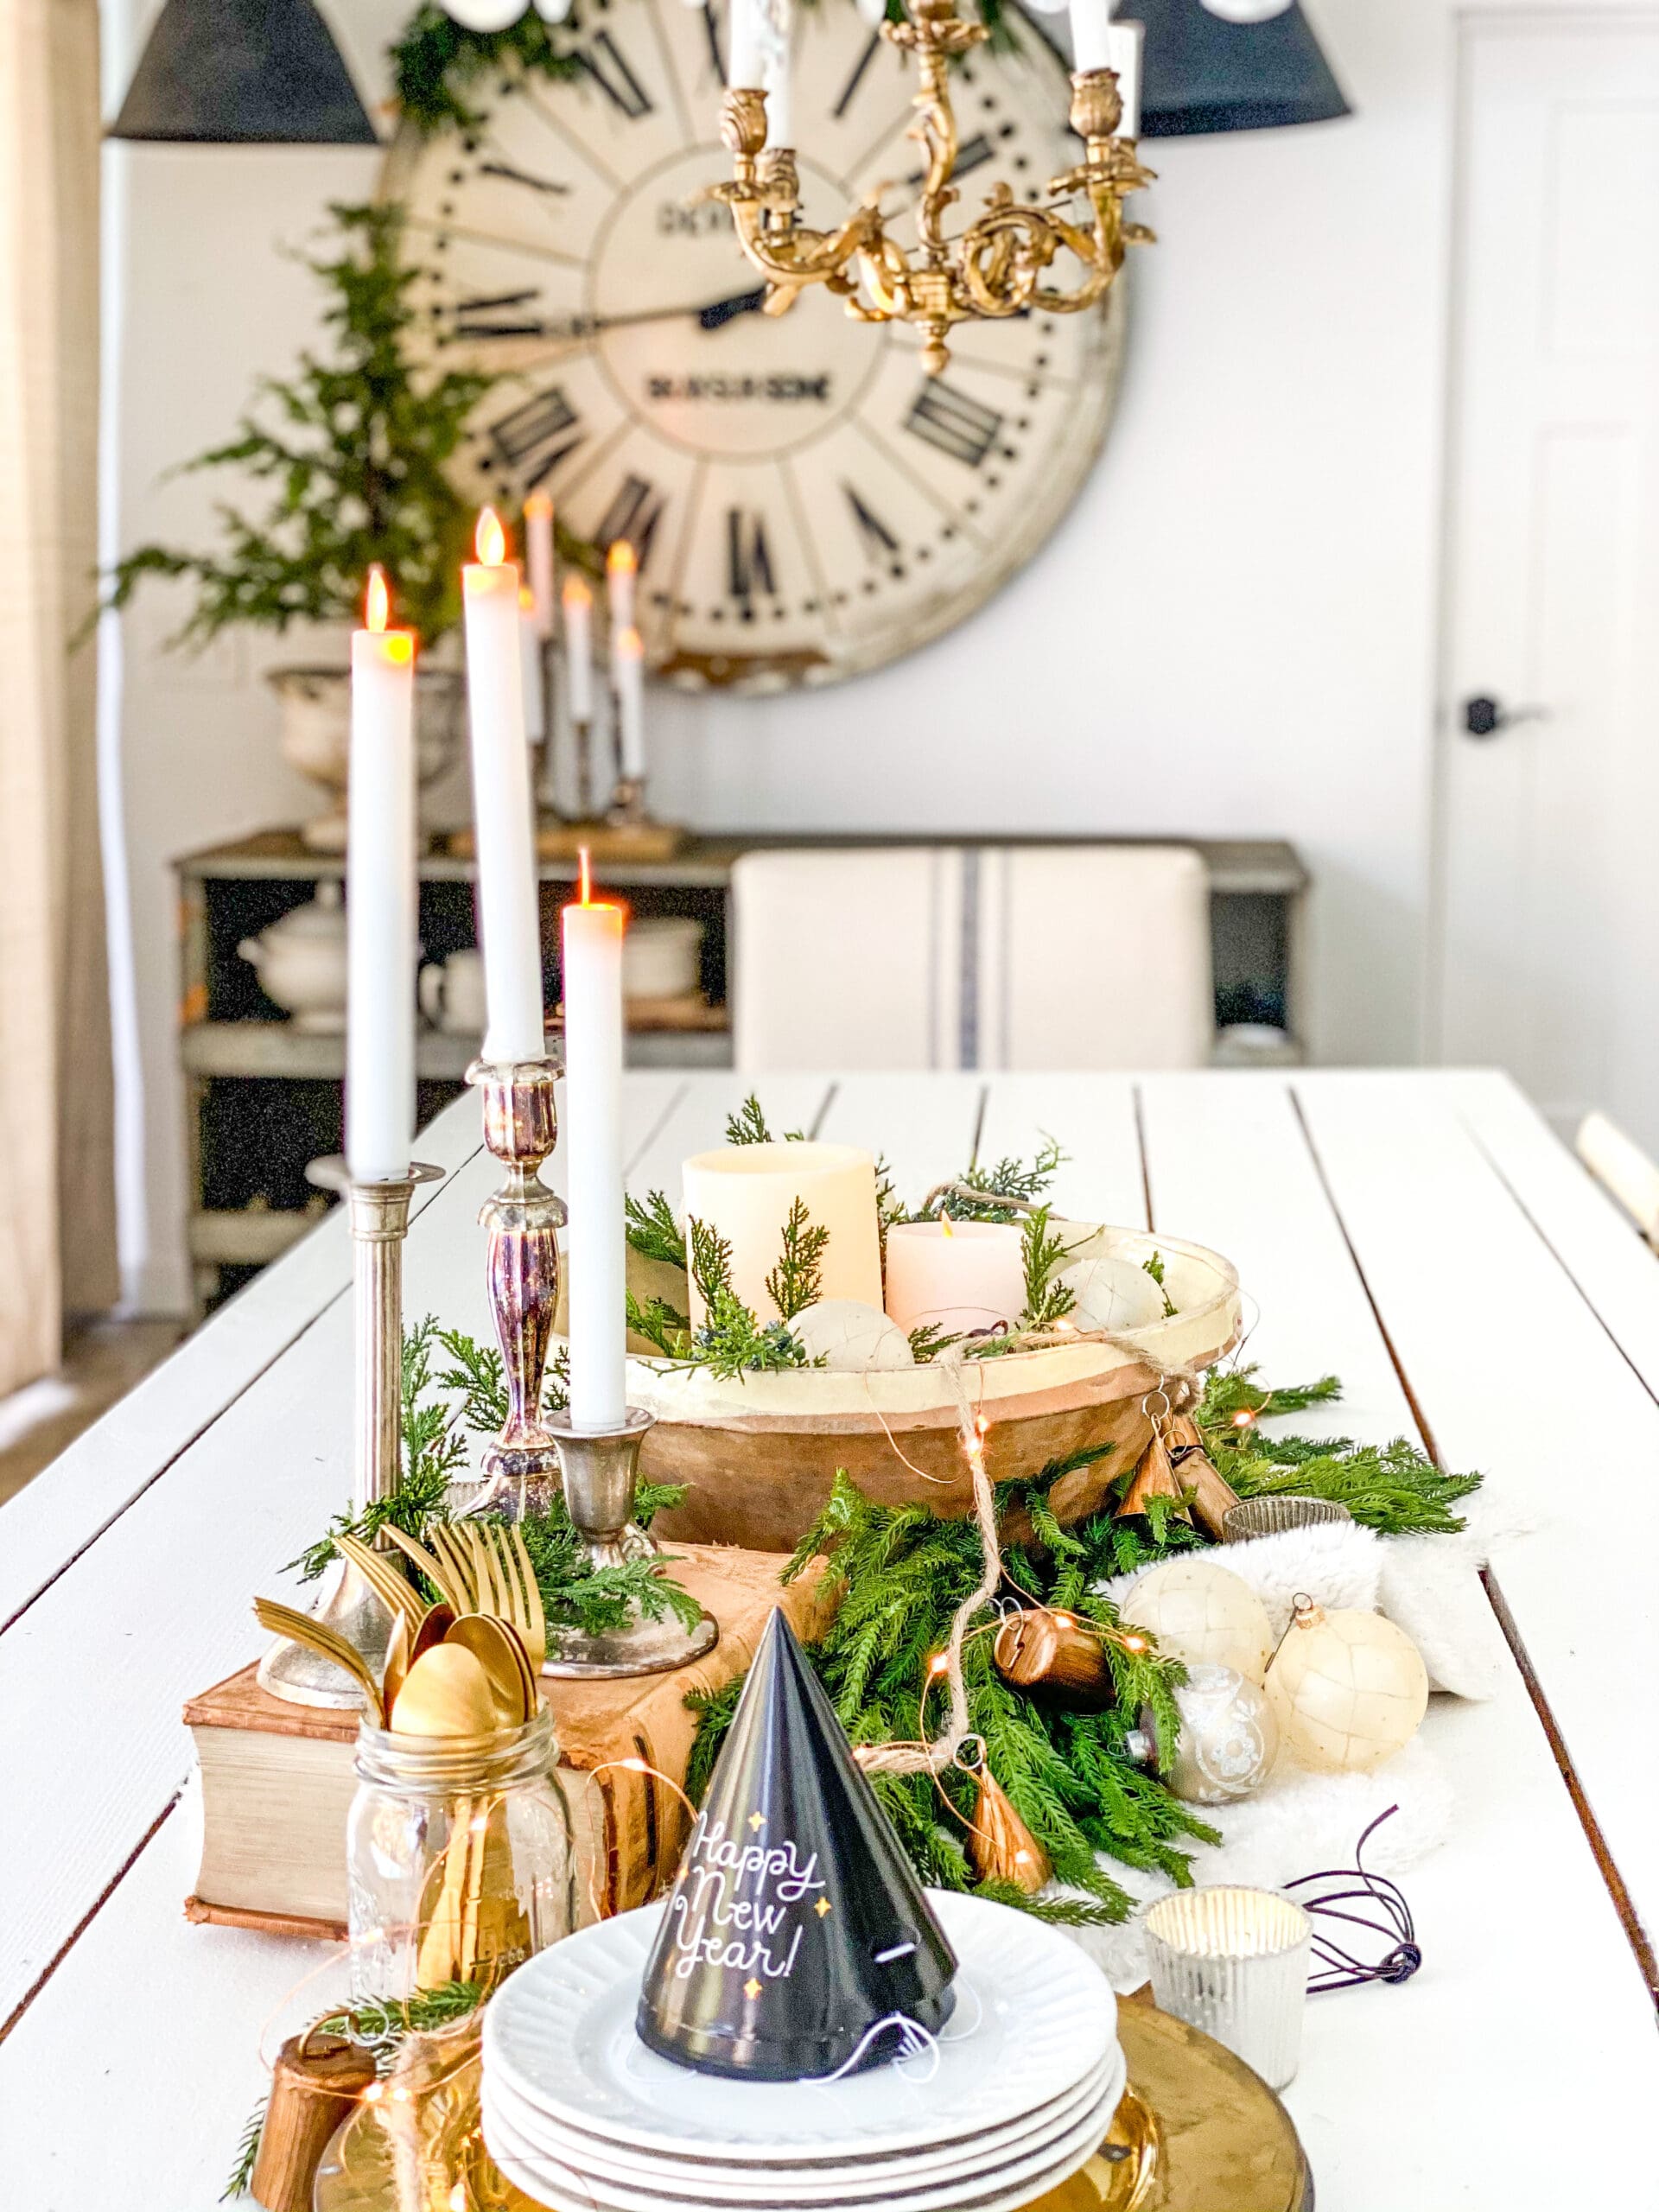 15 Easy New Year's Eve Decor Ideas for a Classy and Cozy Home